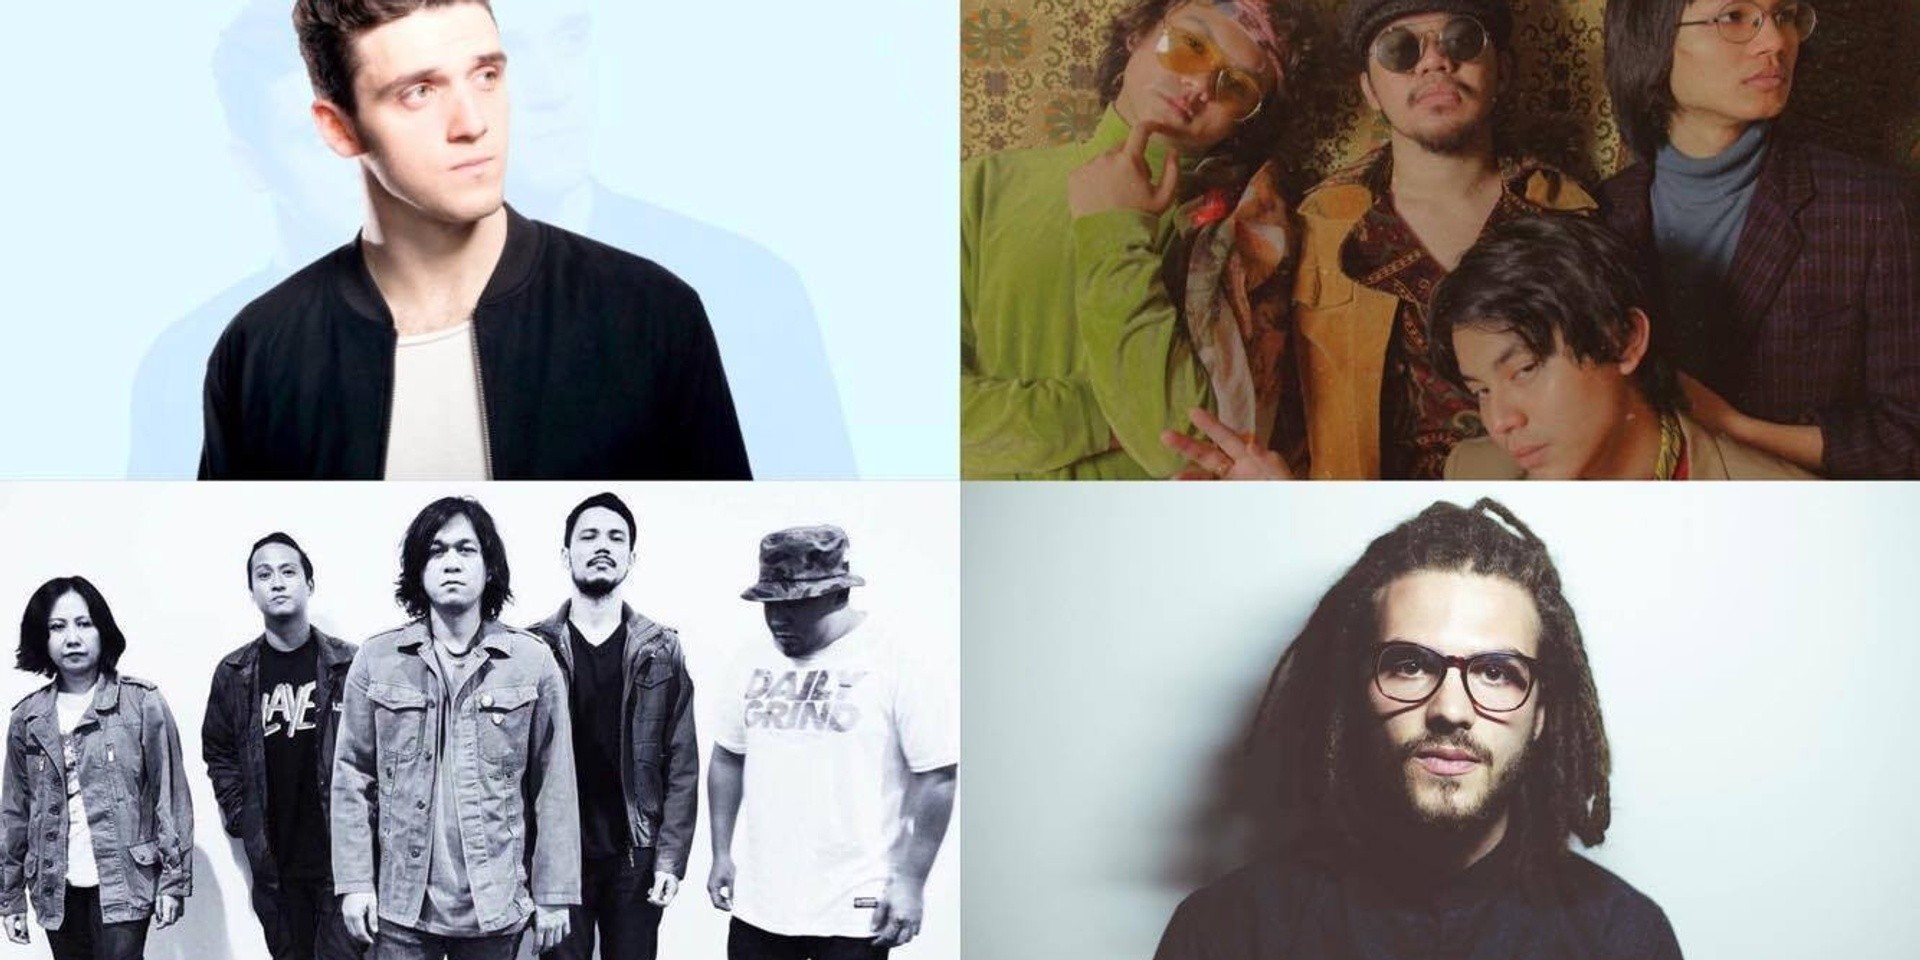 Wanderland unveils Phase 1 line-up – LAUV, FKJ, and more